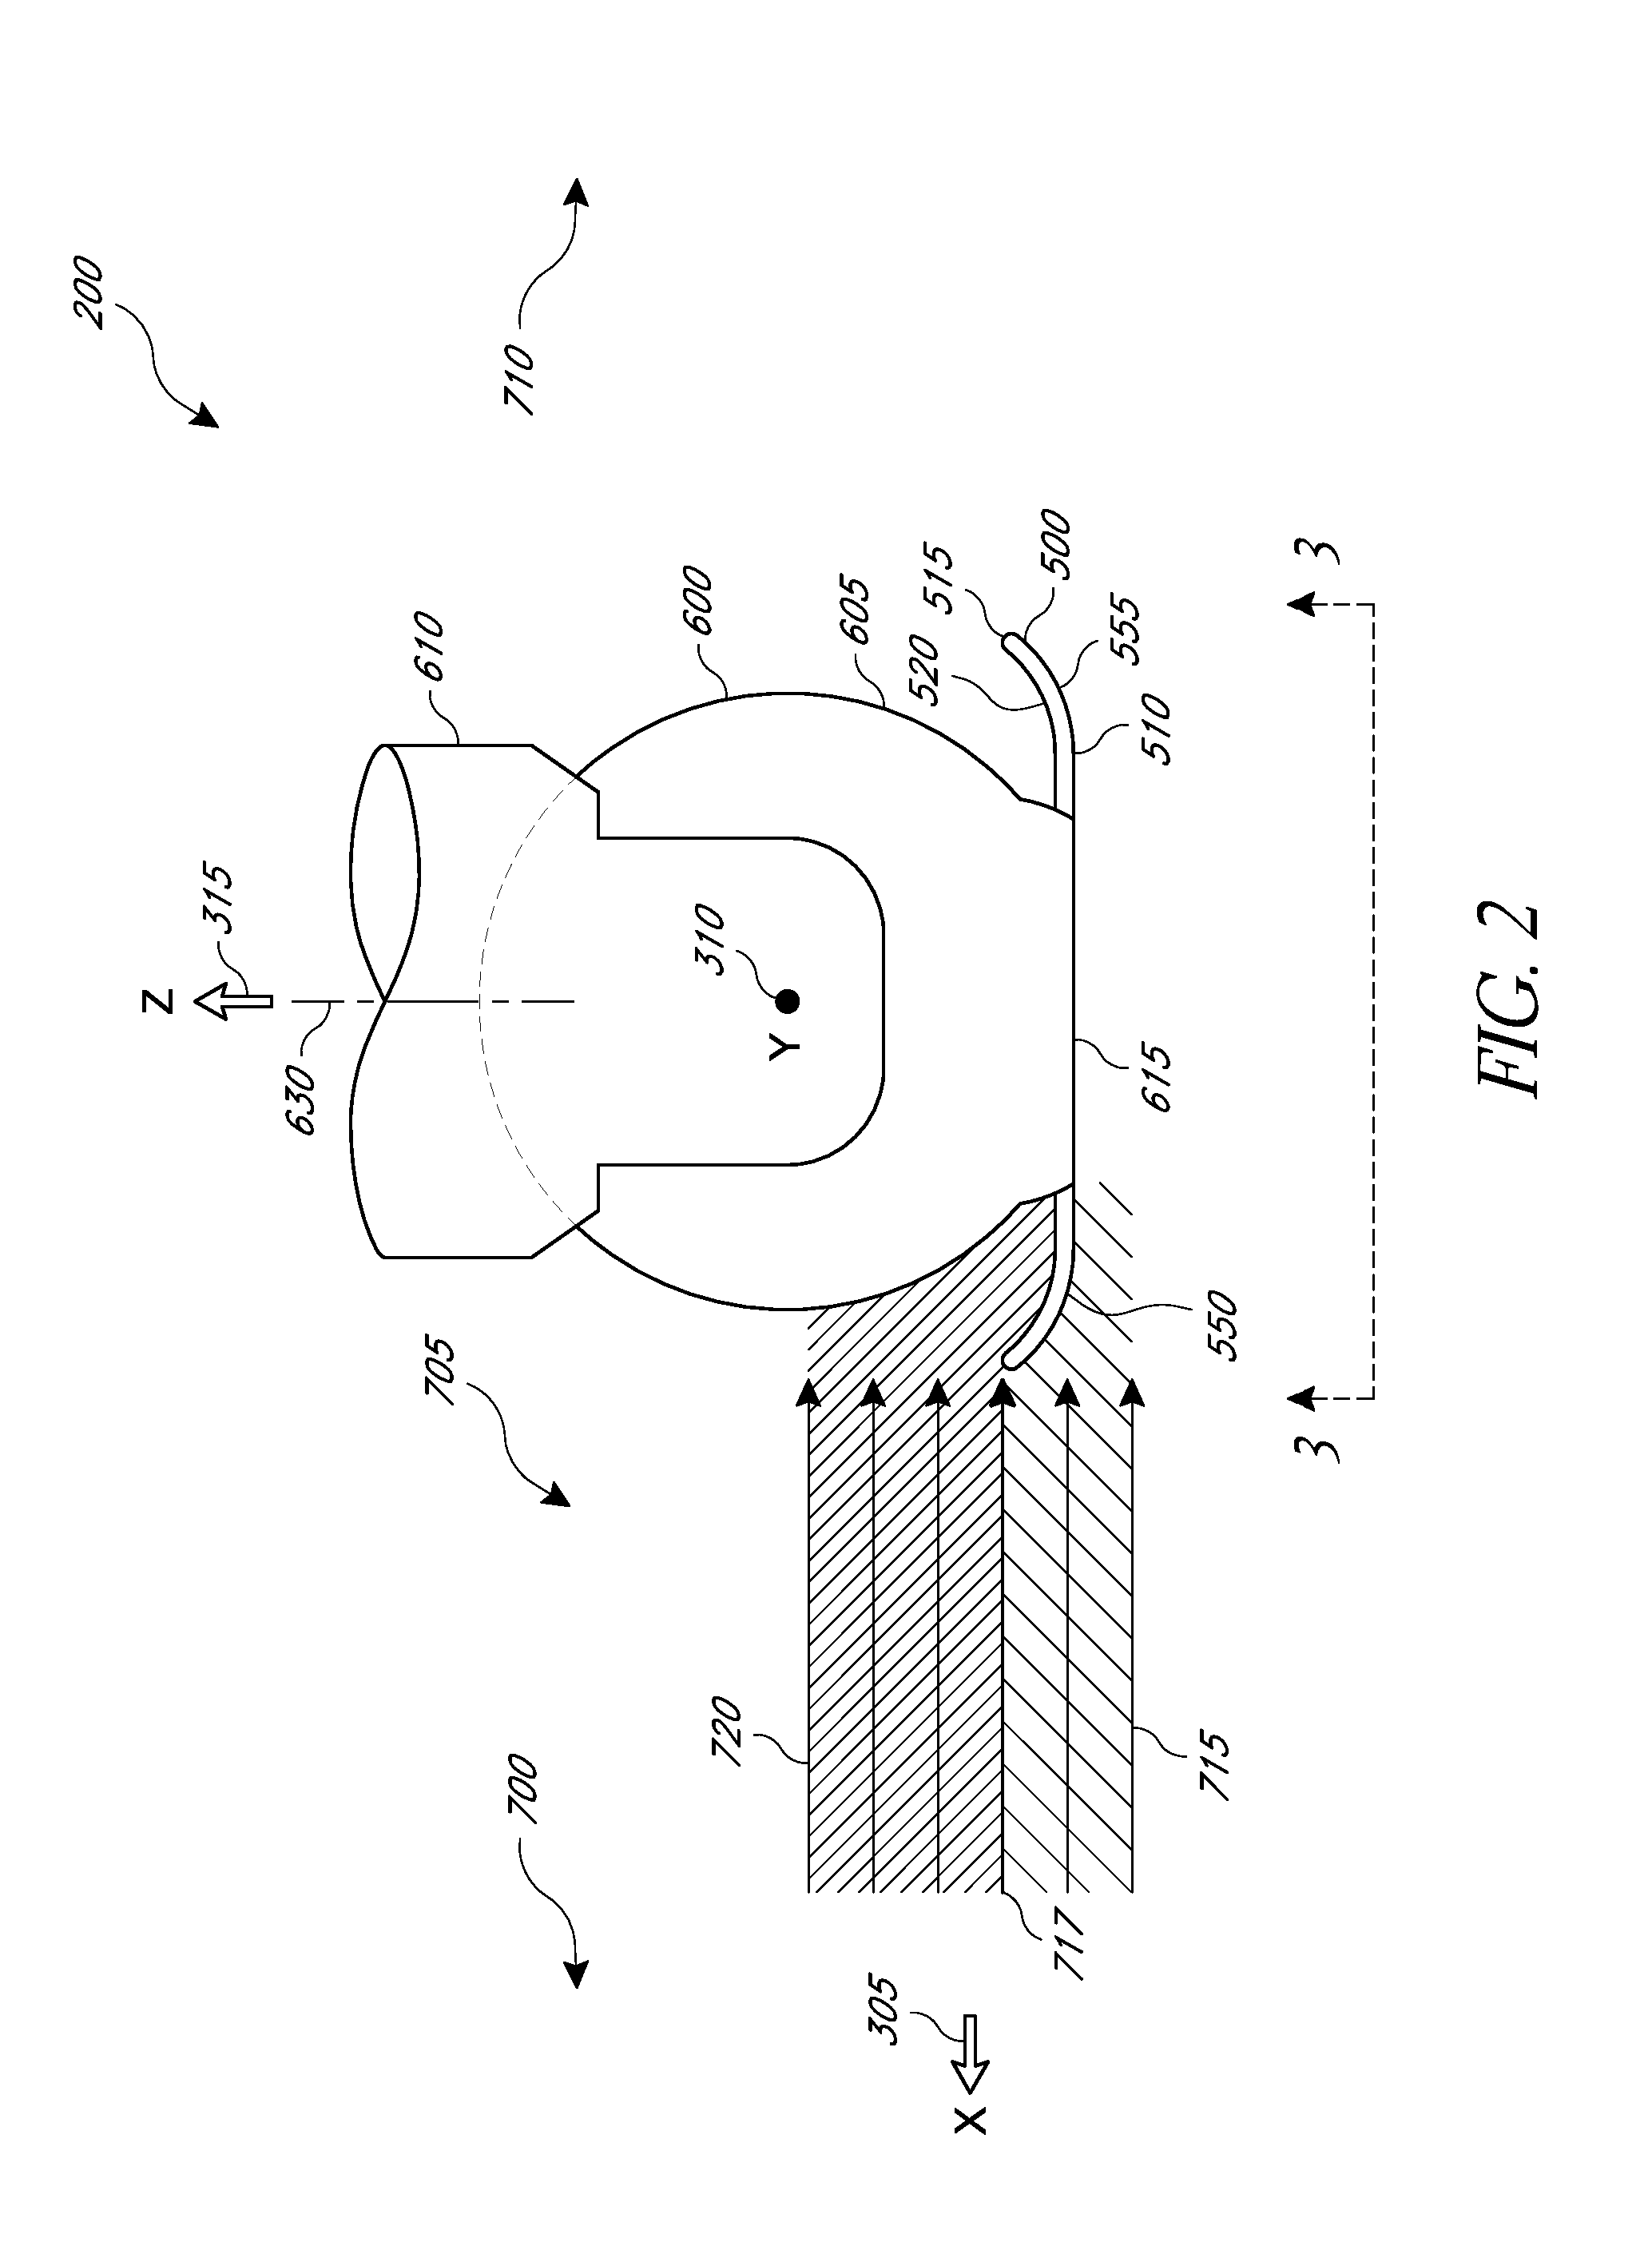 Devices, systems and methods for passive control of flow